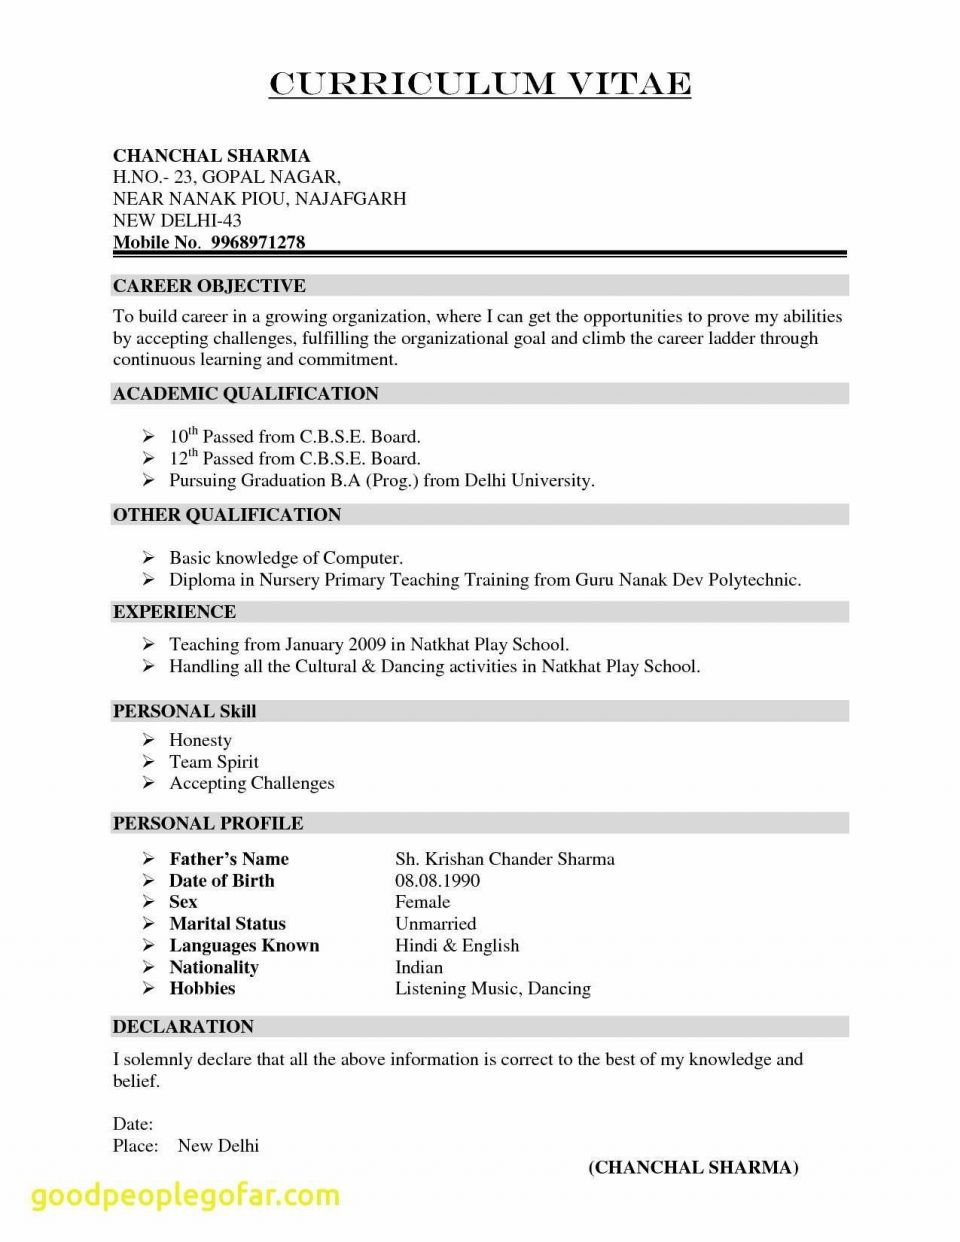 easy free resume template easy free cv templates 2019 easy free cv template easy resume template free download 2020 free easy resume template word easy to use free resume templates free quick easy resume templates free and easy resume template free quick and easy resume template free easy resume builder templates